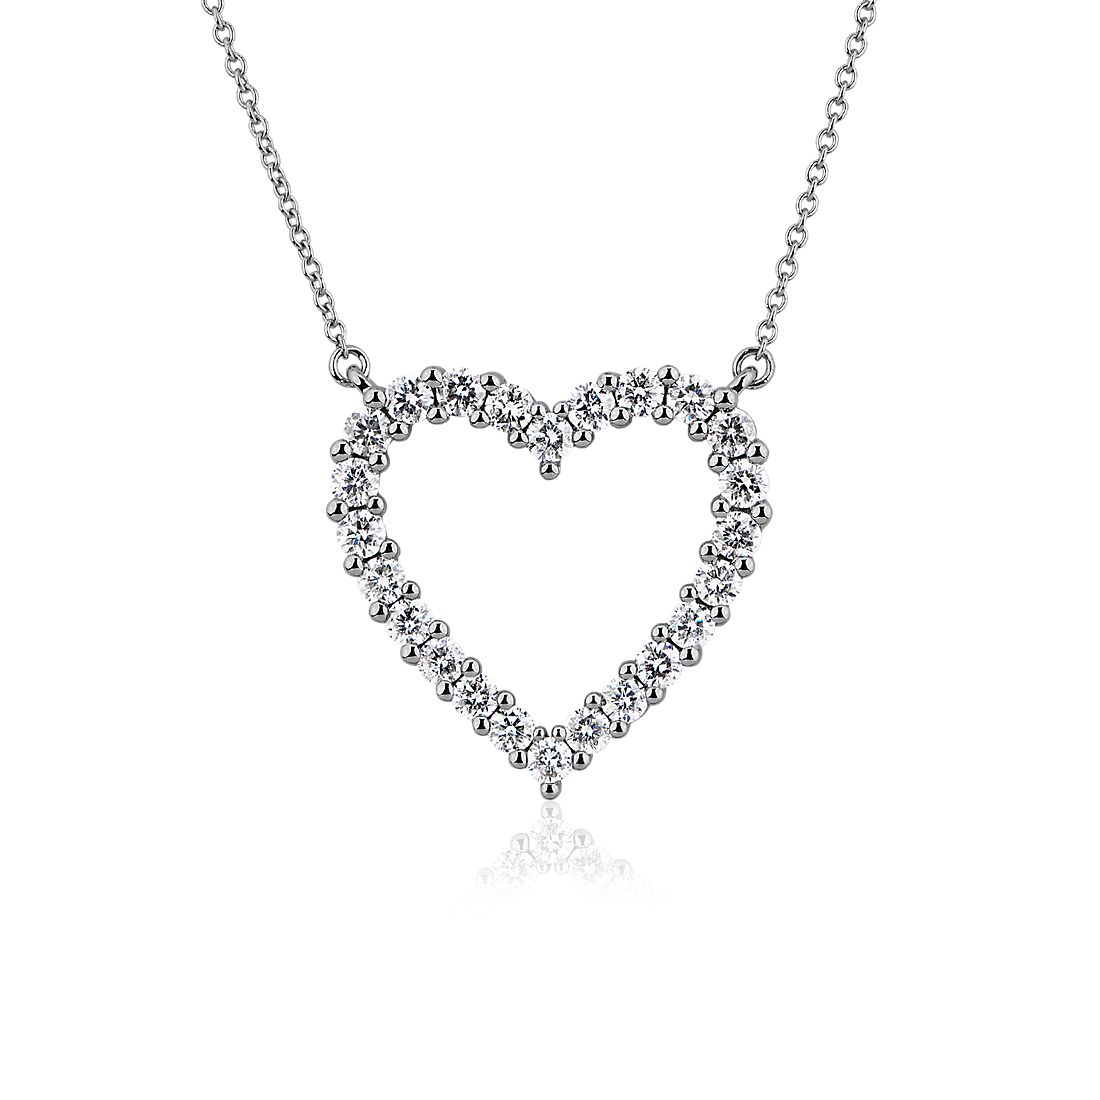 Diamond Heart Shaped Necklace in 14k White Gold (1 ct. tw.)